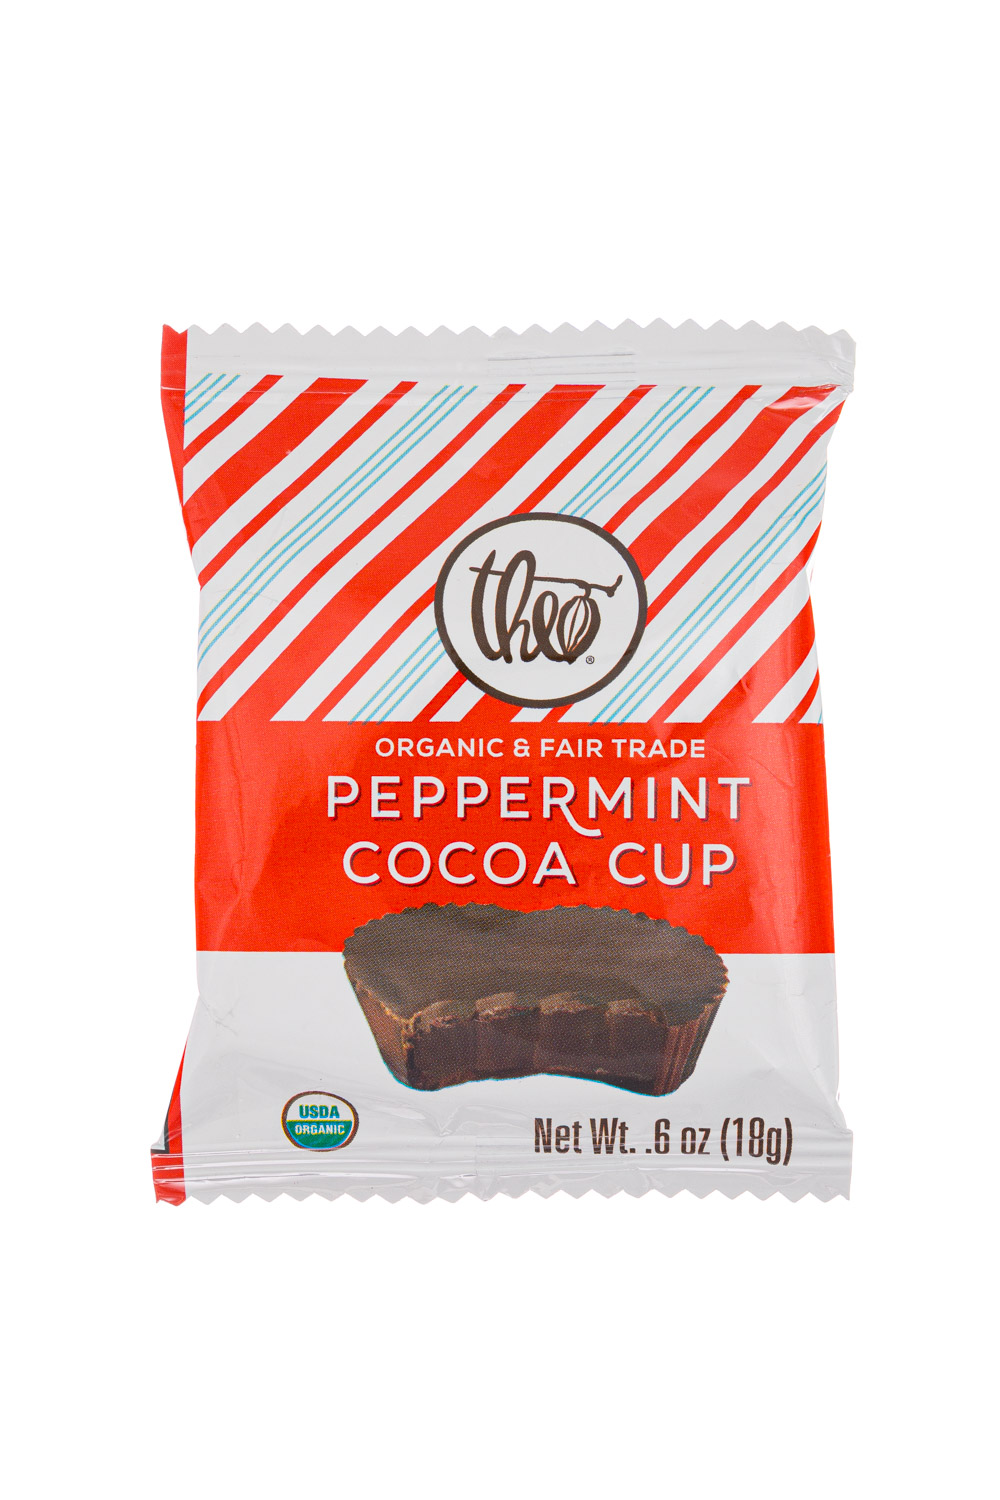 Peppermint Cocoa Cup